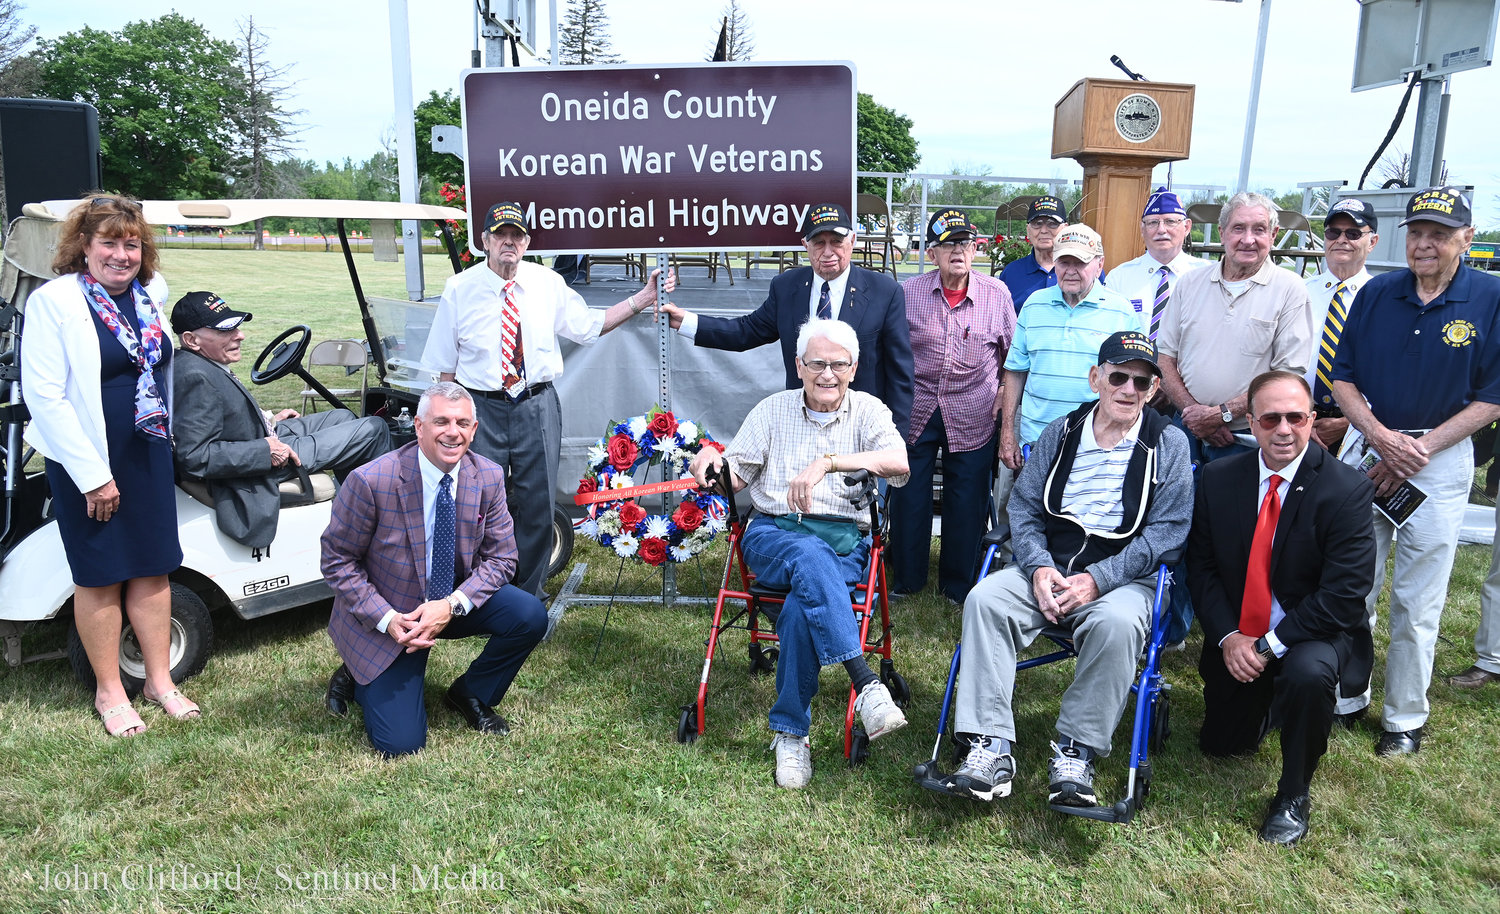 Assemblywoman Marianne Buttenschon, Oneida County Executive Anthony J. Picente, Jr.  and Sen. Joseph Griffo with Korean War Veterans that attended the ceremony Wednesday, July 27, 2022.